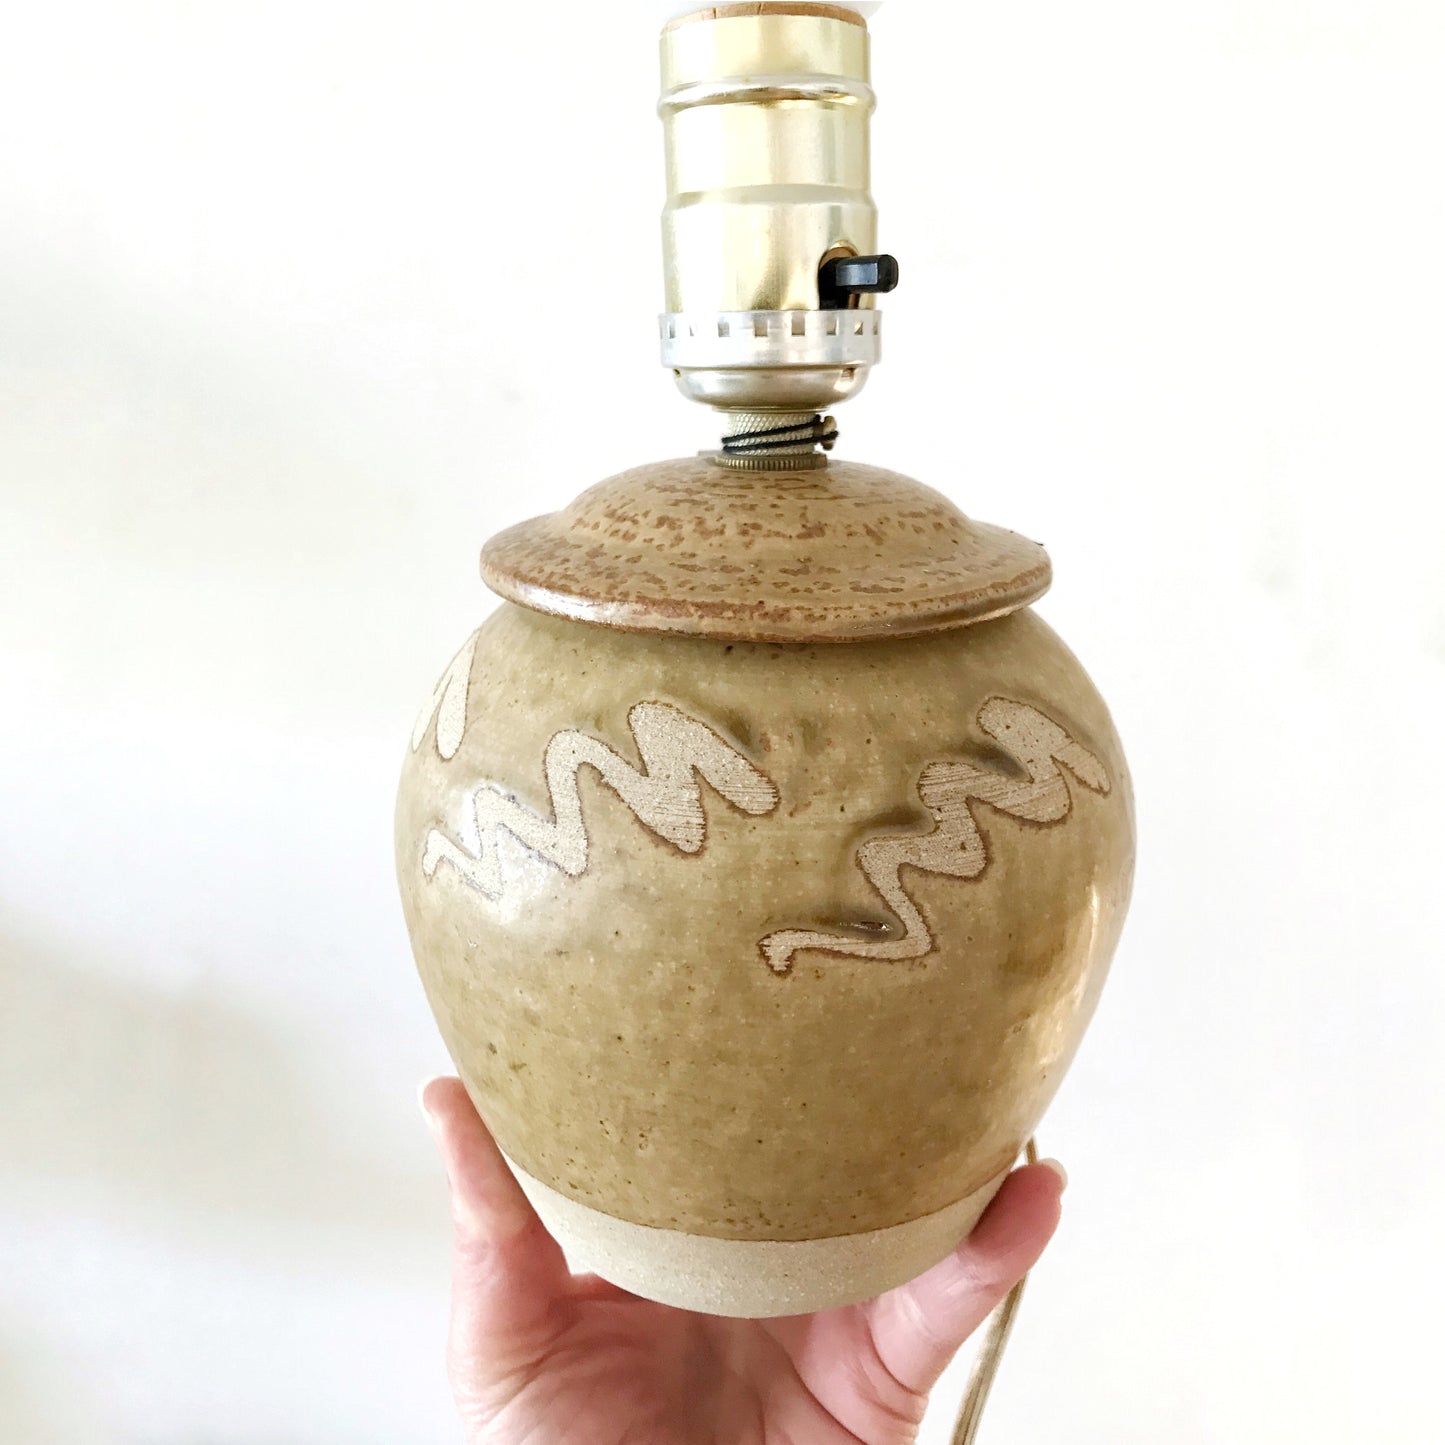 Small Handcrafted Pottery Lamp